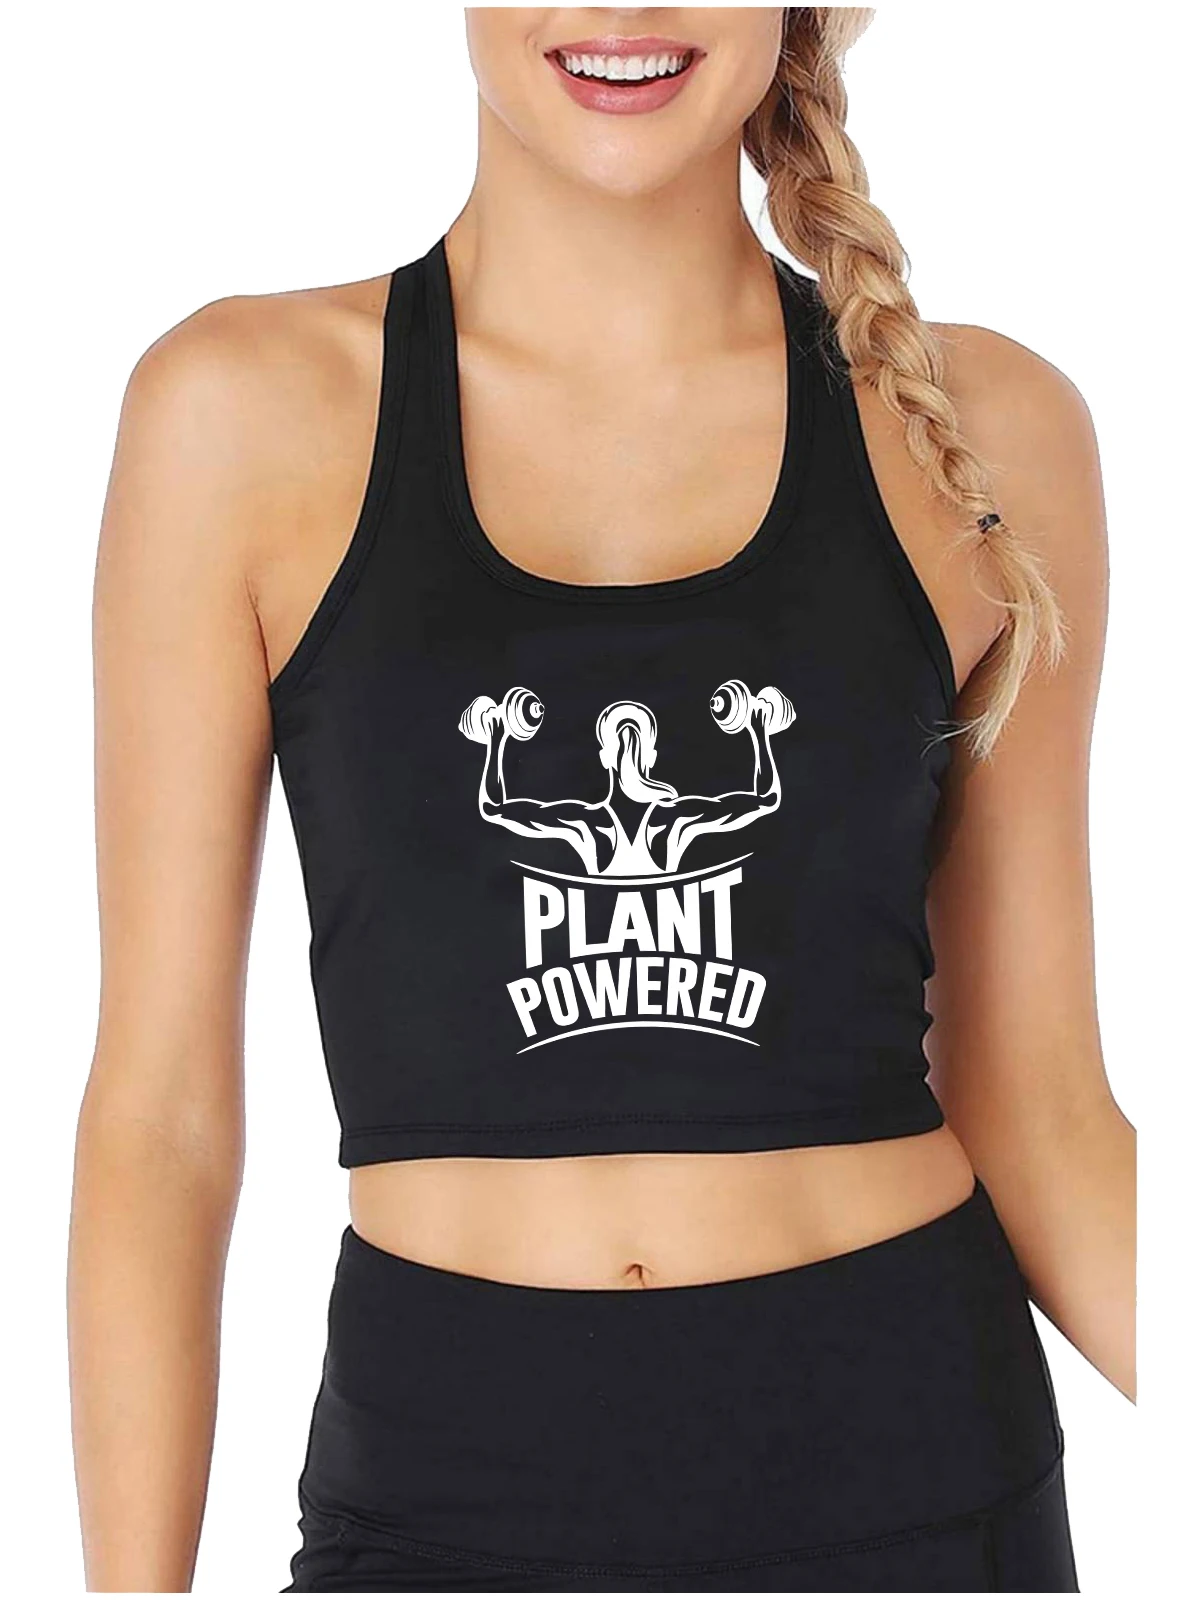 

Plant Powered Design Funny Sexy Slim Crop Top Vegan Fitness Sports Workout Tank Tops Well-toned Girl's Quality Cotton Camisole